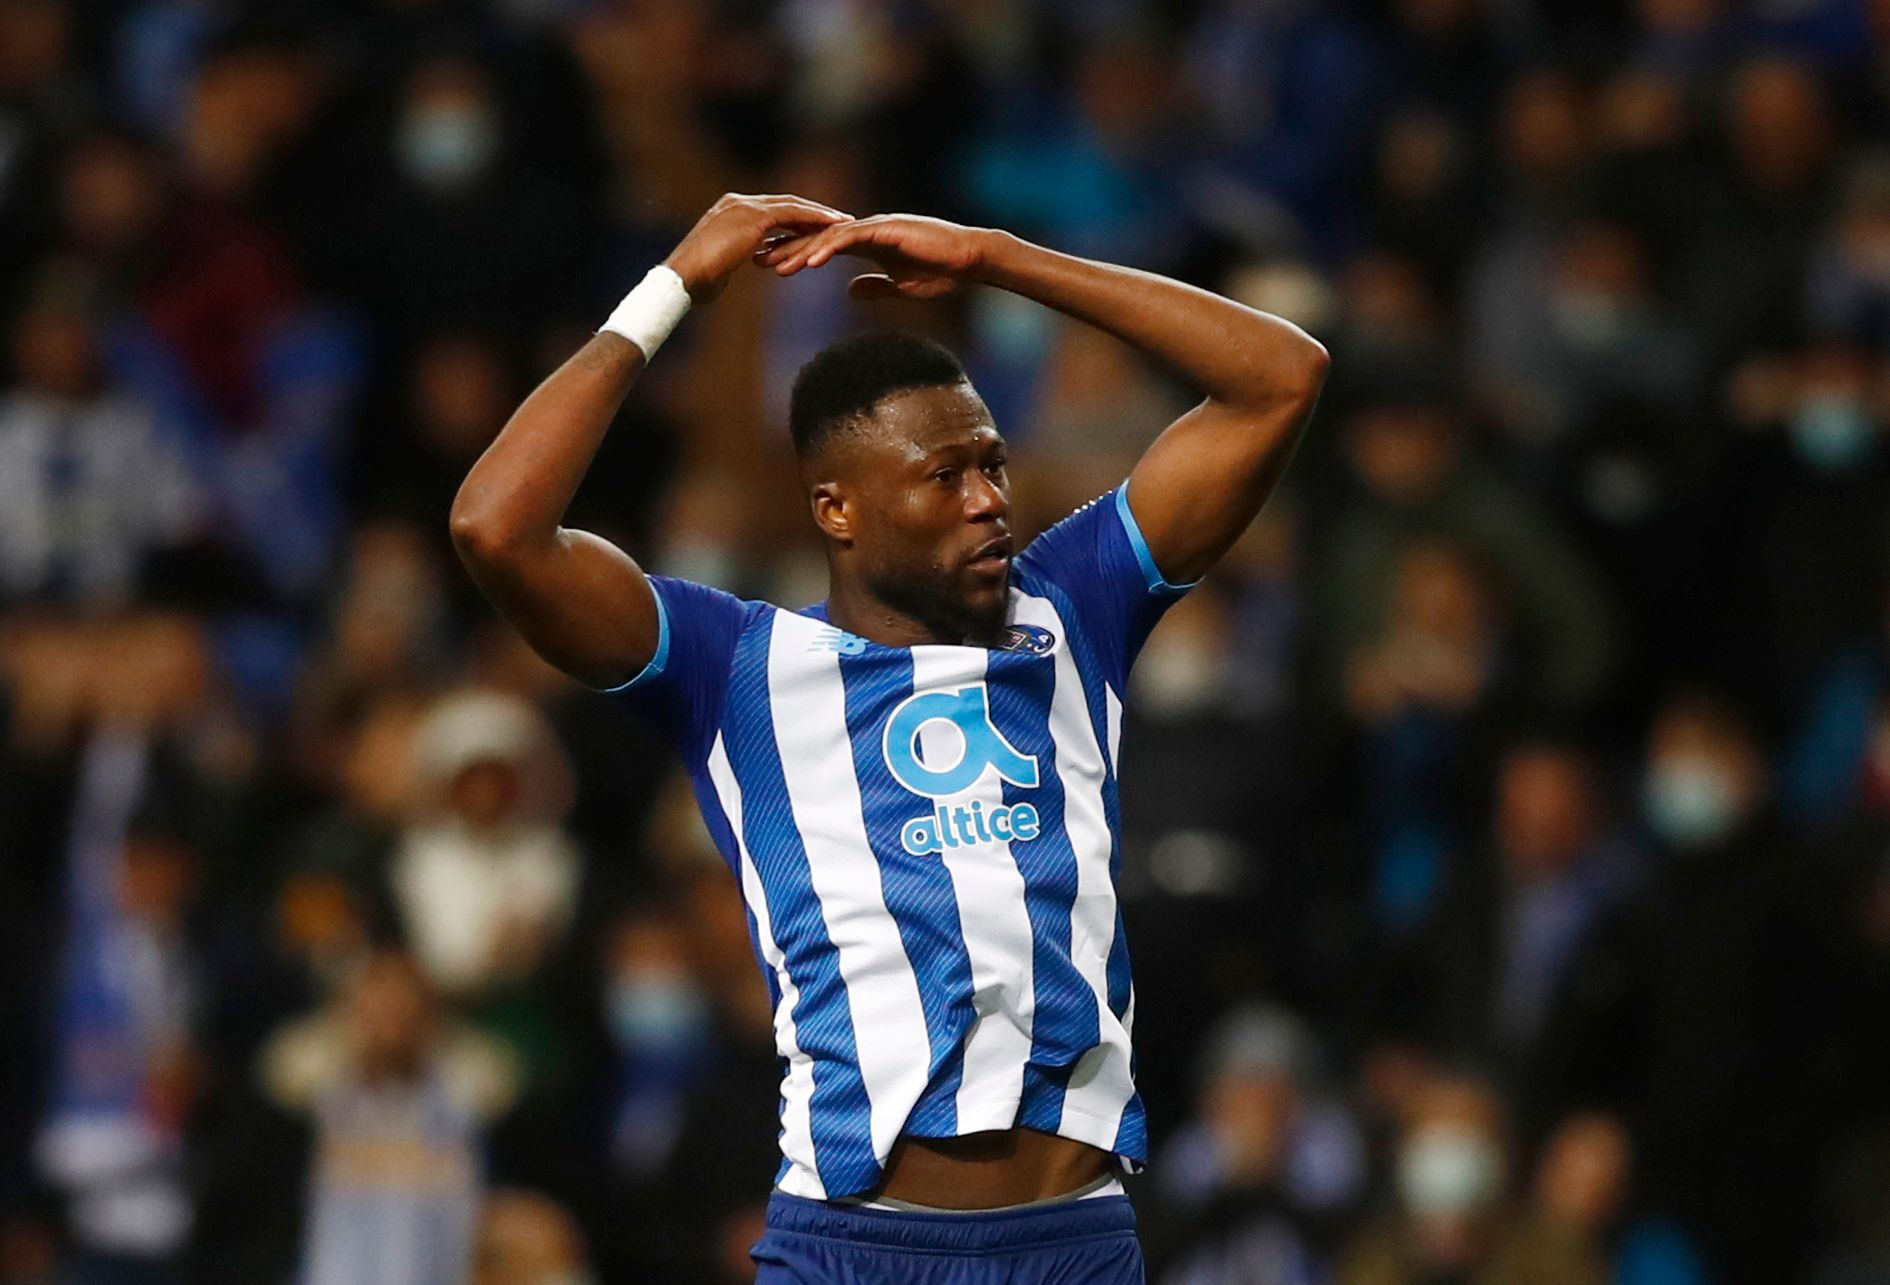 Soccer Football - Europa League - Round of 16 First Leg - FC Porto v Olympique Lyonnais - Estadio do Dragao, Porto, Portugal - March 9, 2022 FC Porto's Chancel Mbemba reacts after scoring their first goal but it was later disallowed after a VAR review REUTERS/Pedro Nunes